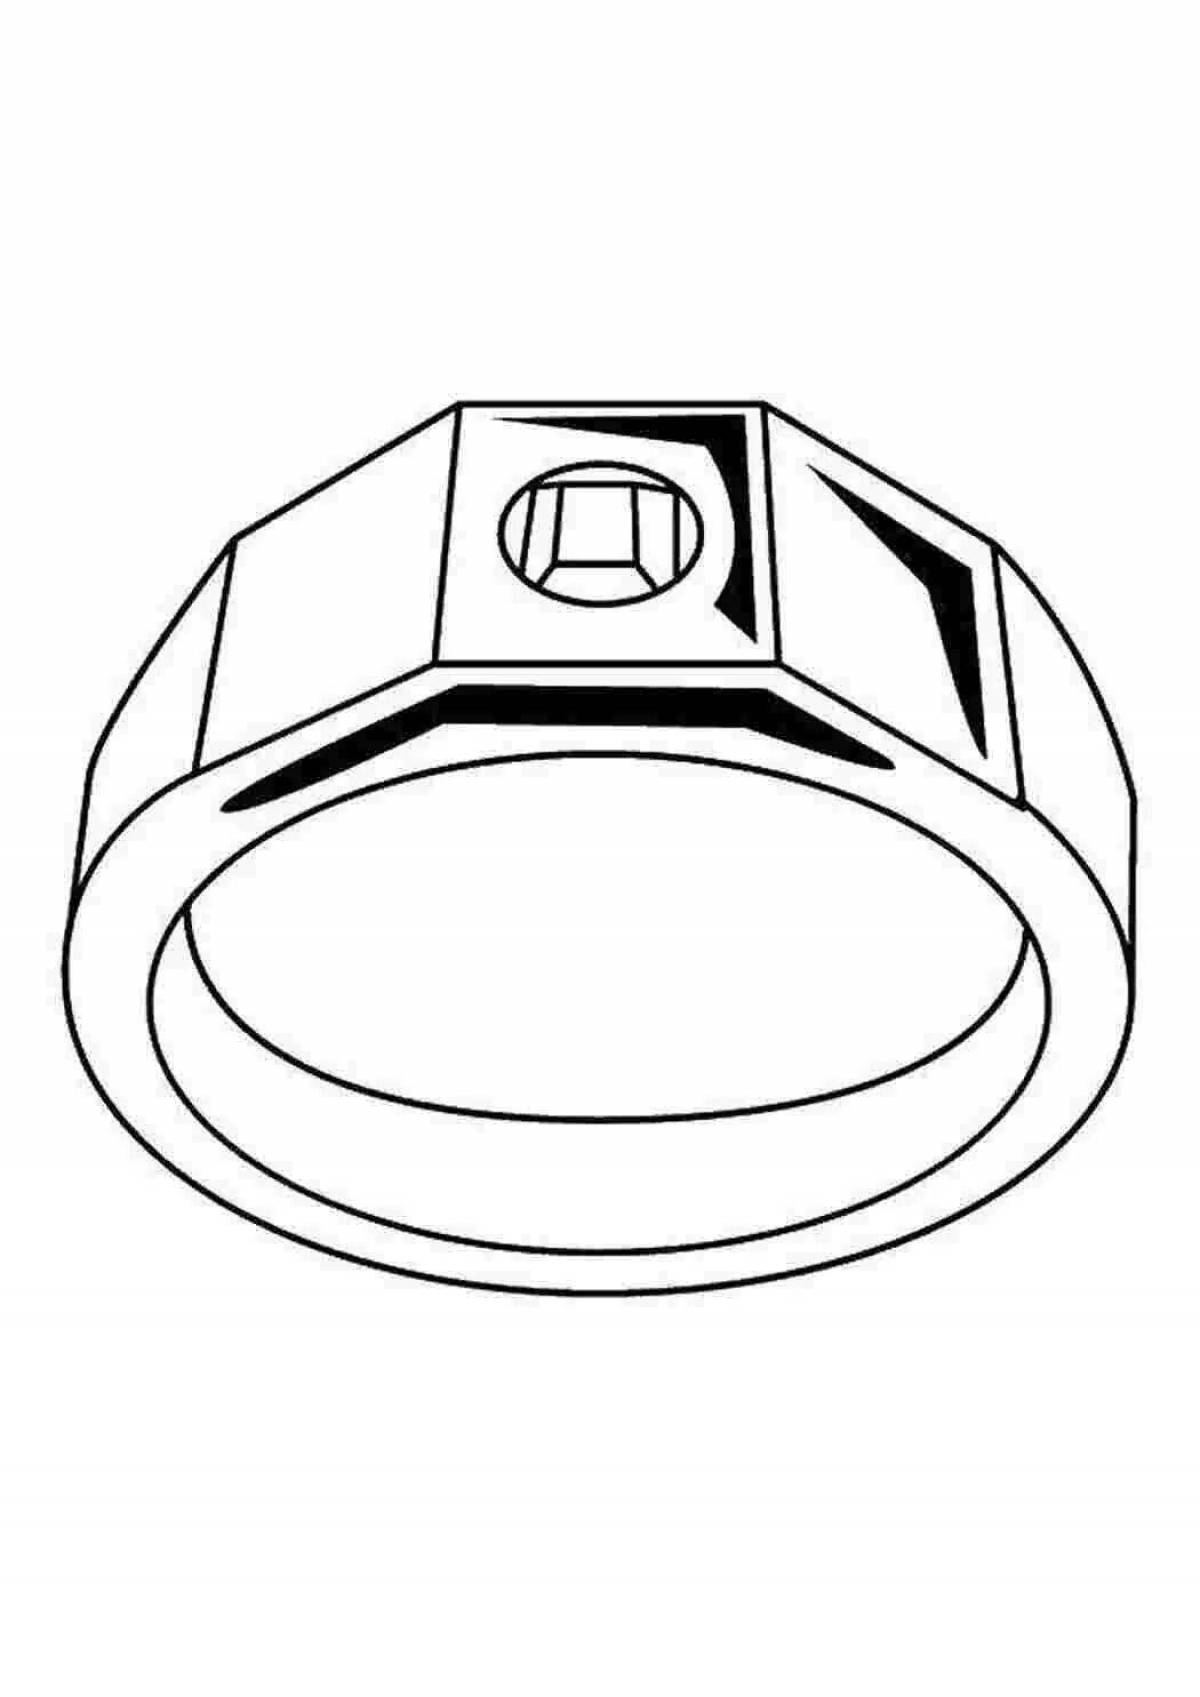 Exquisite stone ring coloring page